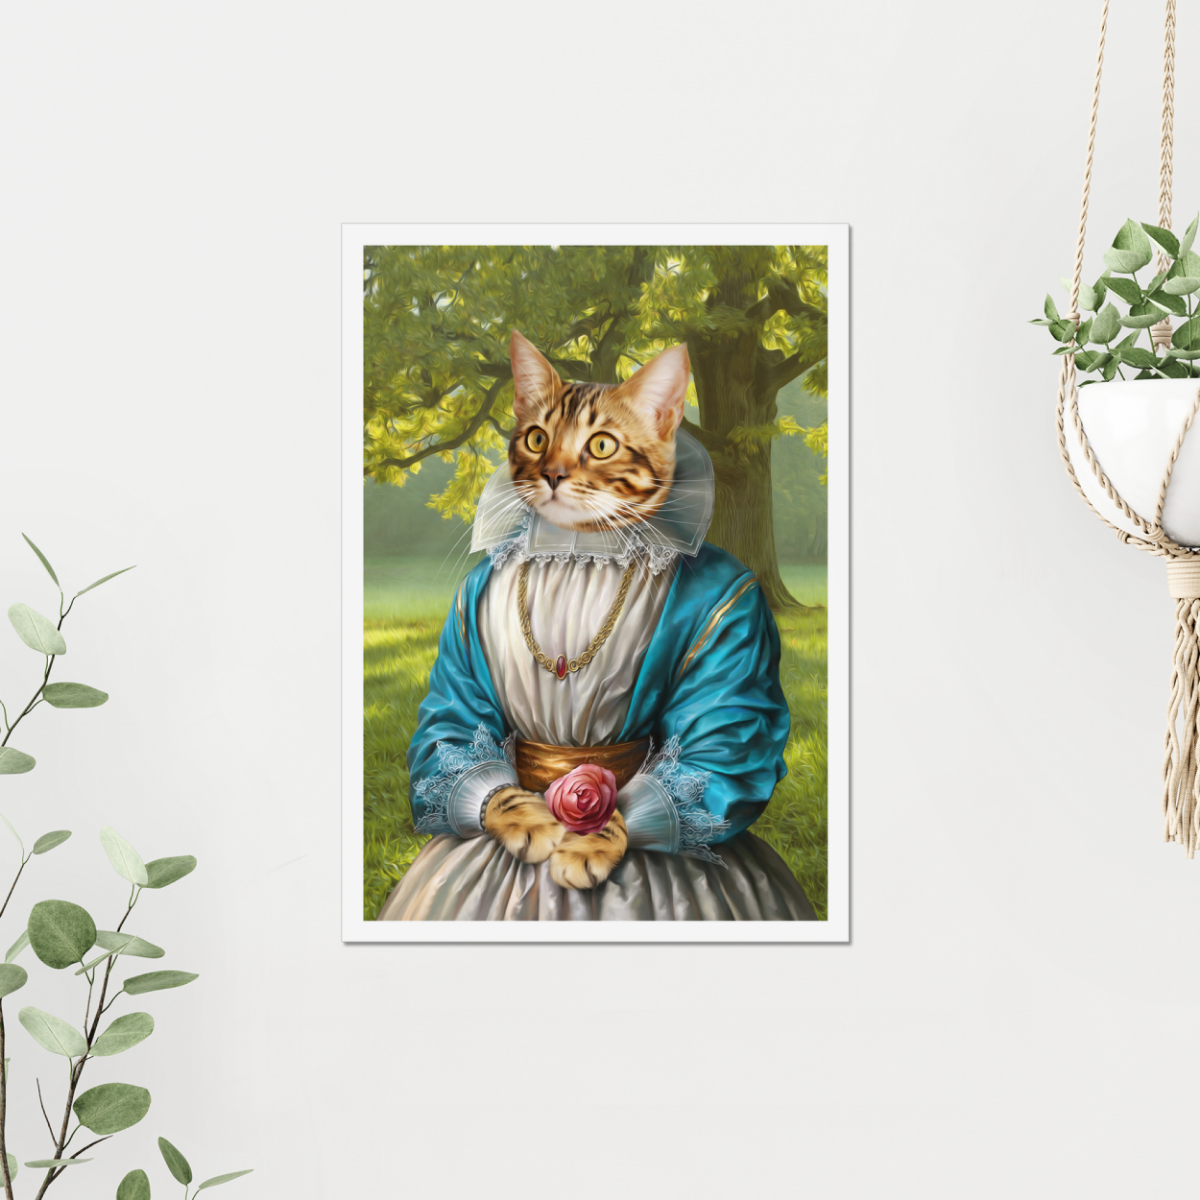 The Sweetheart: Custom Pet Poster - Paw & Glory - #pet portraits# - #dog portraits# - #pet portraits uk#Paw & Glory, pawandglory, drawing pictures of pets, the admiral dog portrait, professional pet photos, dog canvas art, the admiral dog portrait, dog portraits colorful, pet portrait